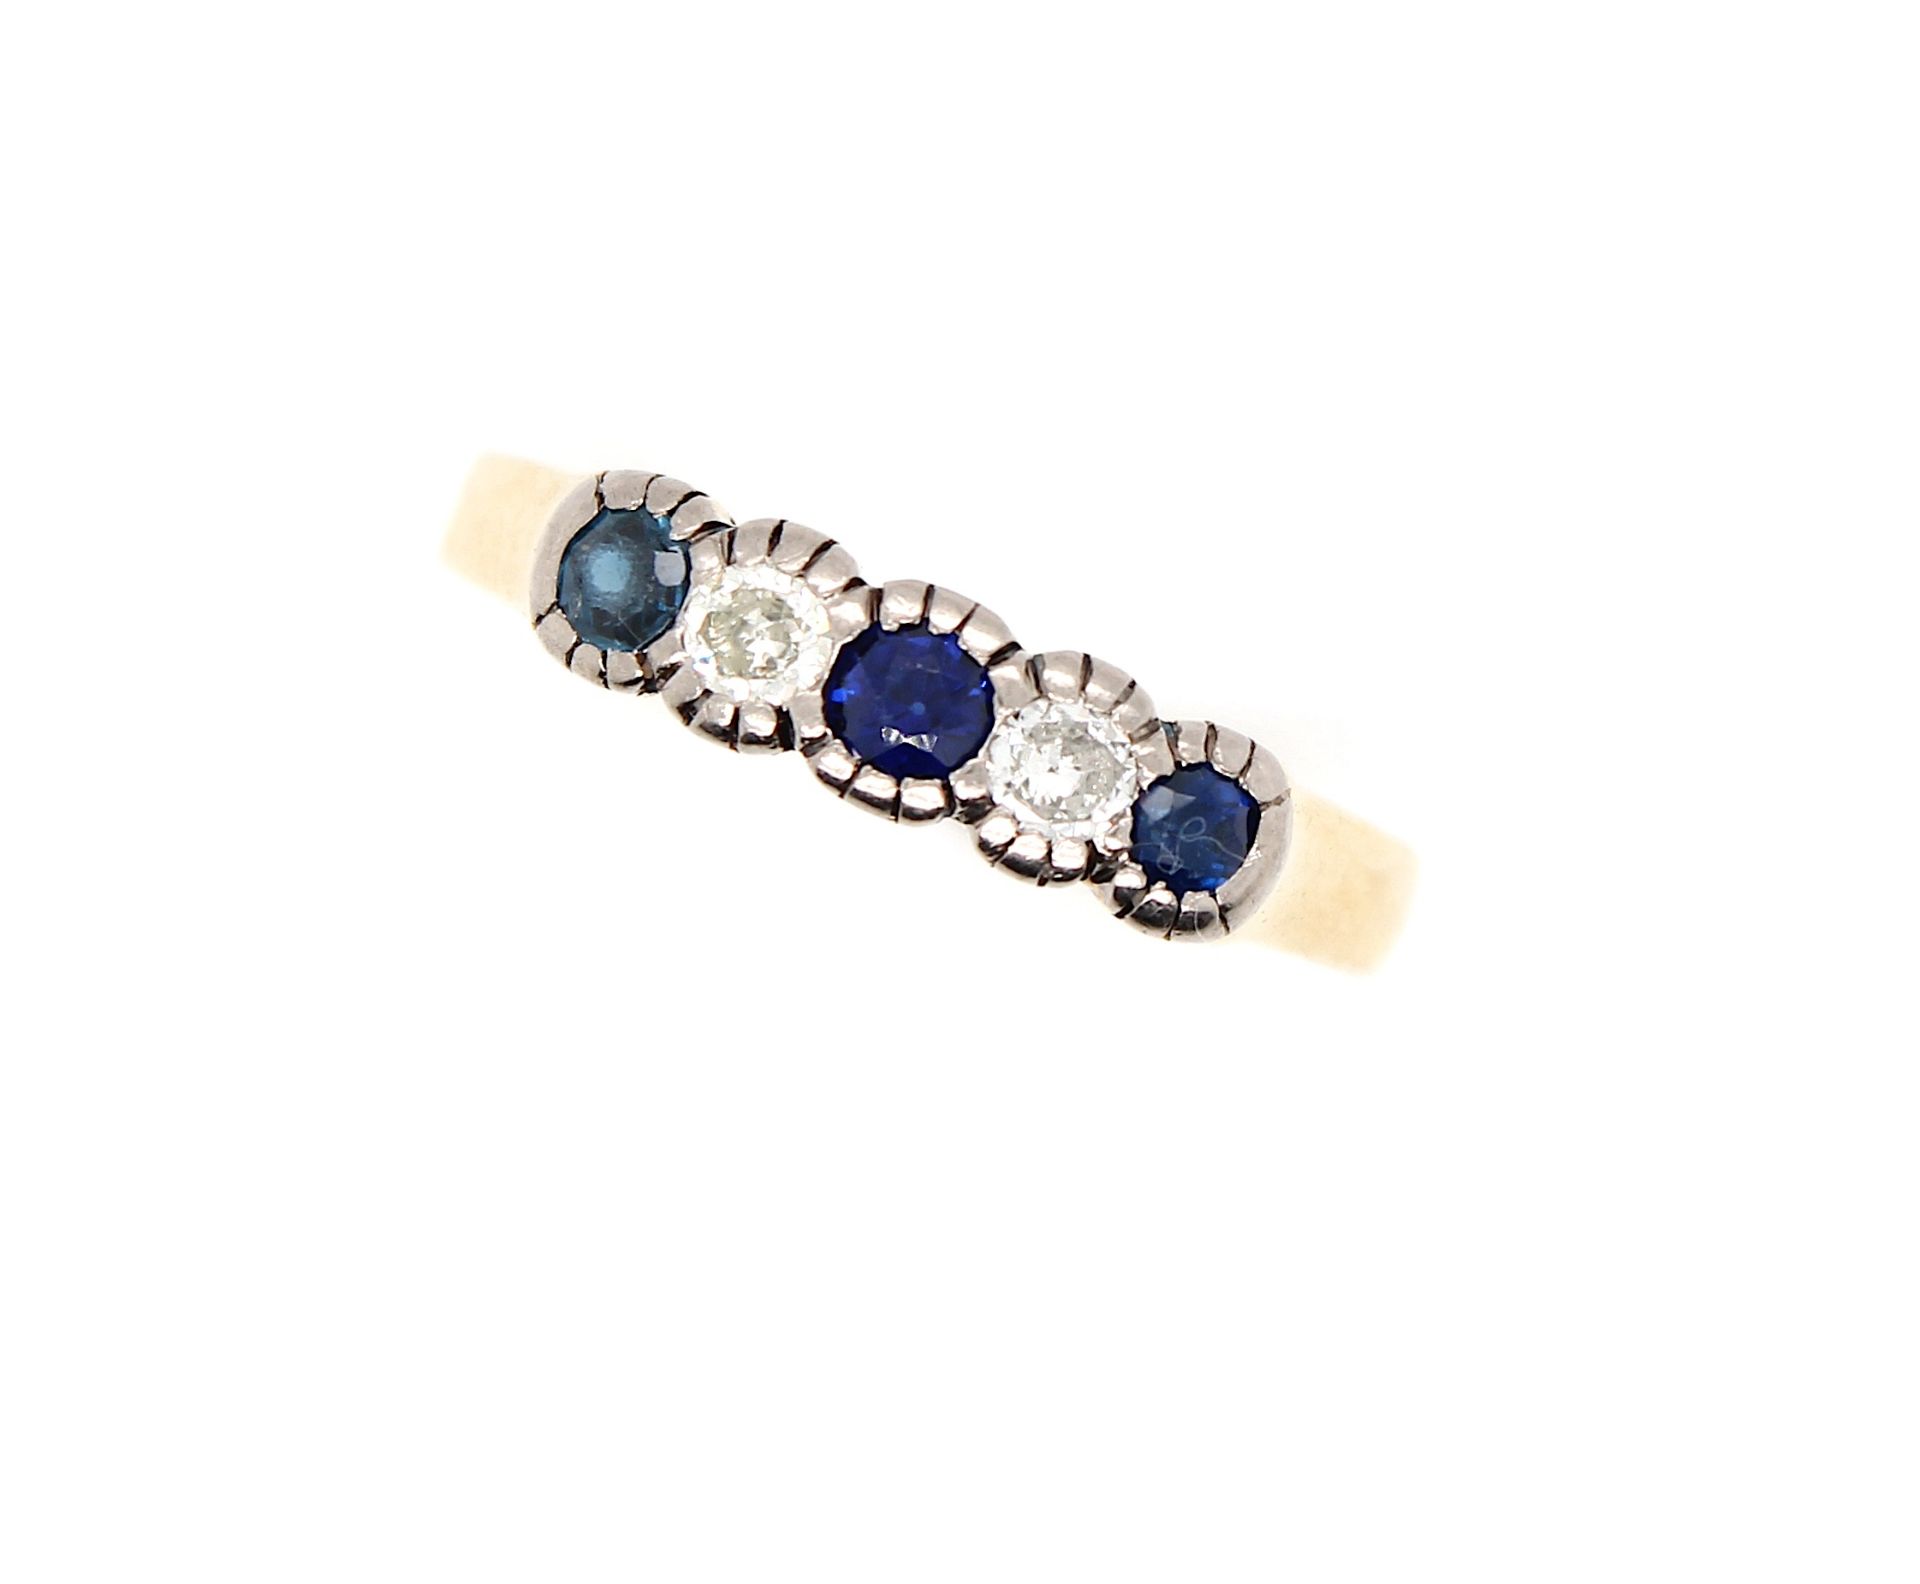 Vintage ring with sapphires and diamonds